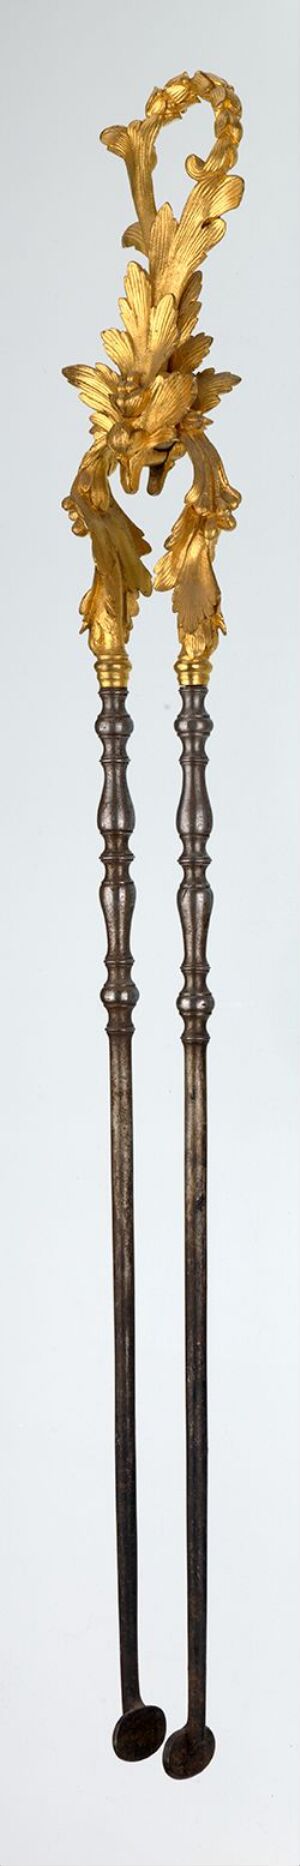  A pair of ornate, possibly ceremonial crutches with golden floral decorations at the top and a sleek, segmented shaft with dark bands, against a soft gradient background.